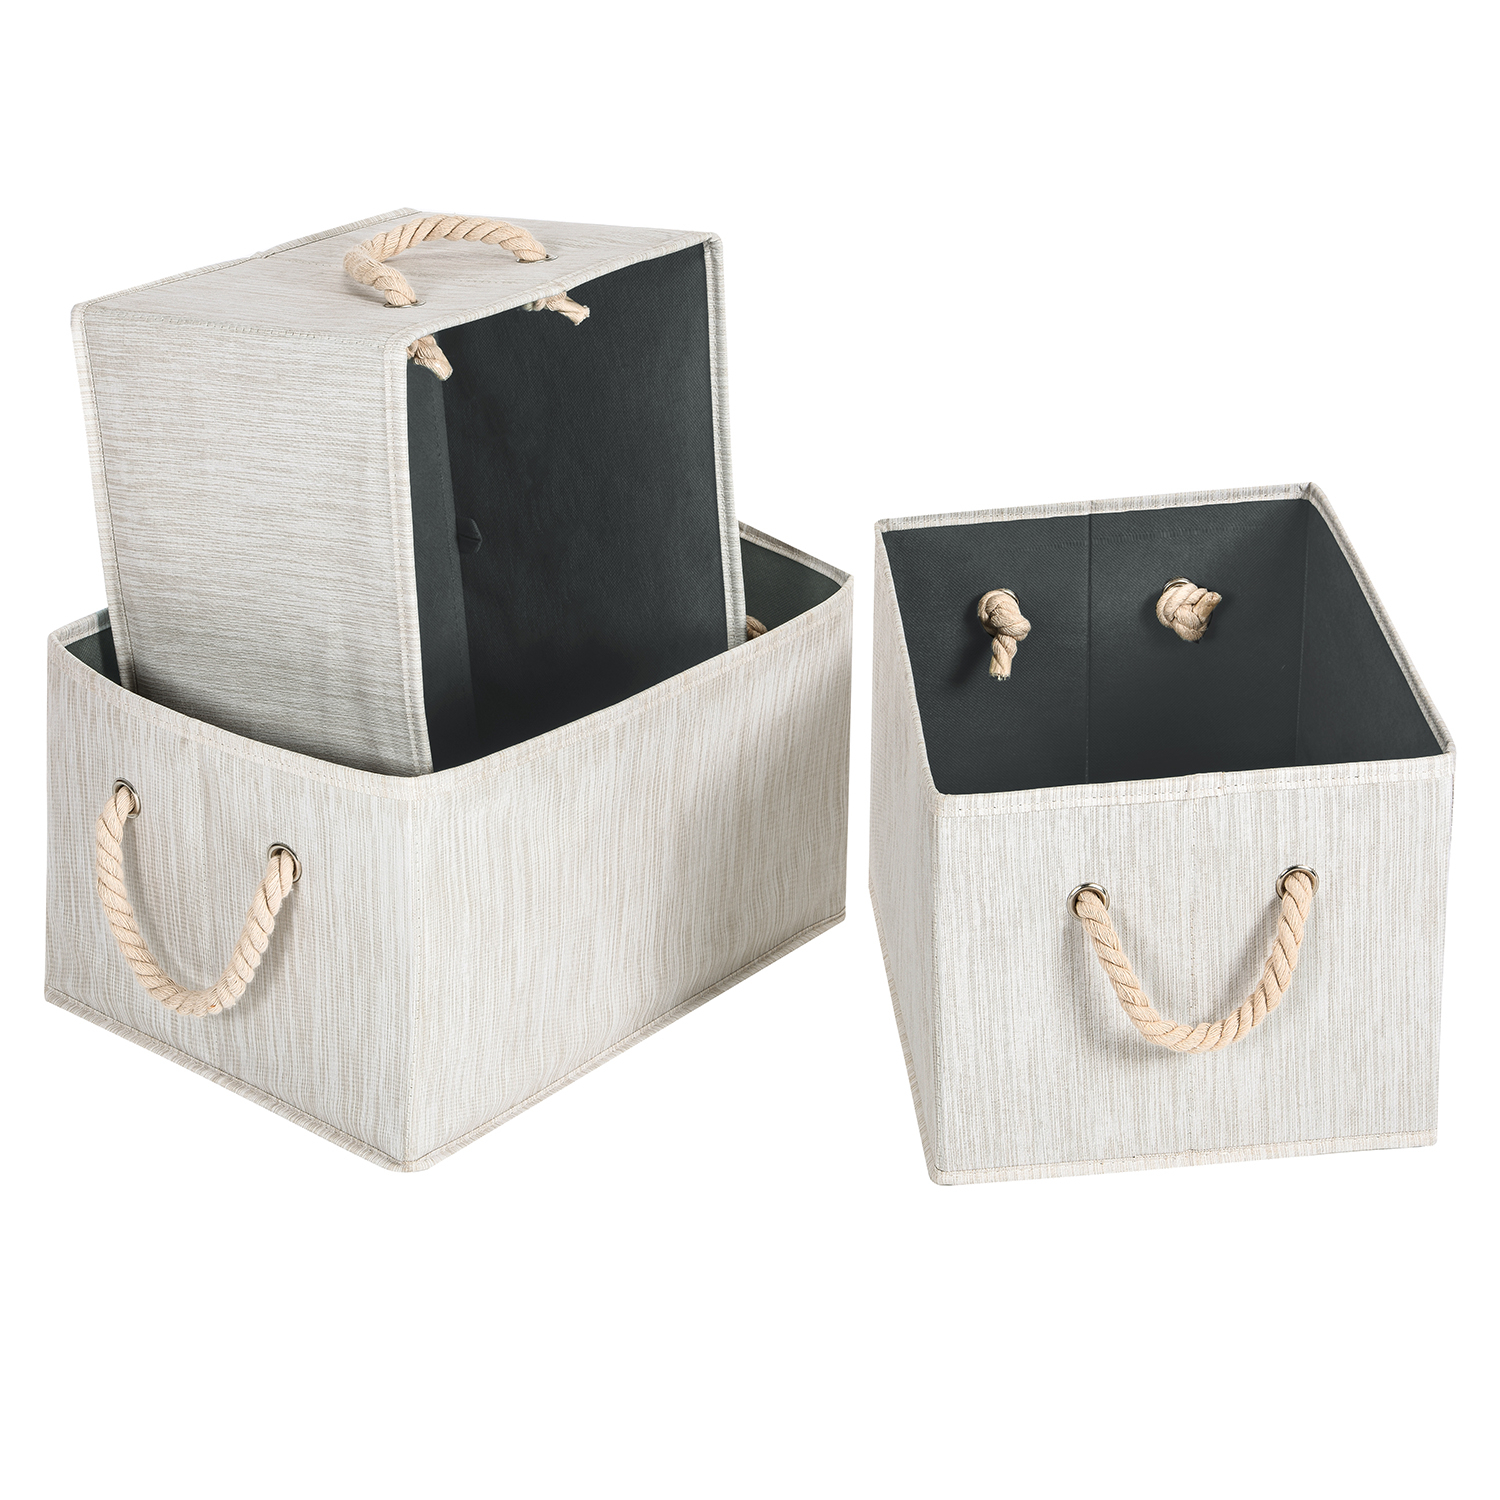 Maidmax Cloth Storage Bins With Two Cotton Ropes Each Bamboo Style Beige Set Of 3 within sizing 1500 X 1500